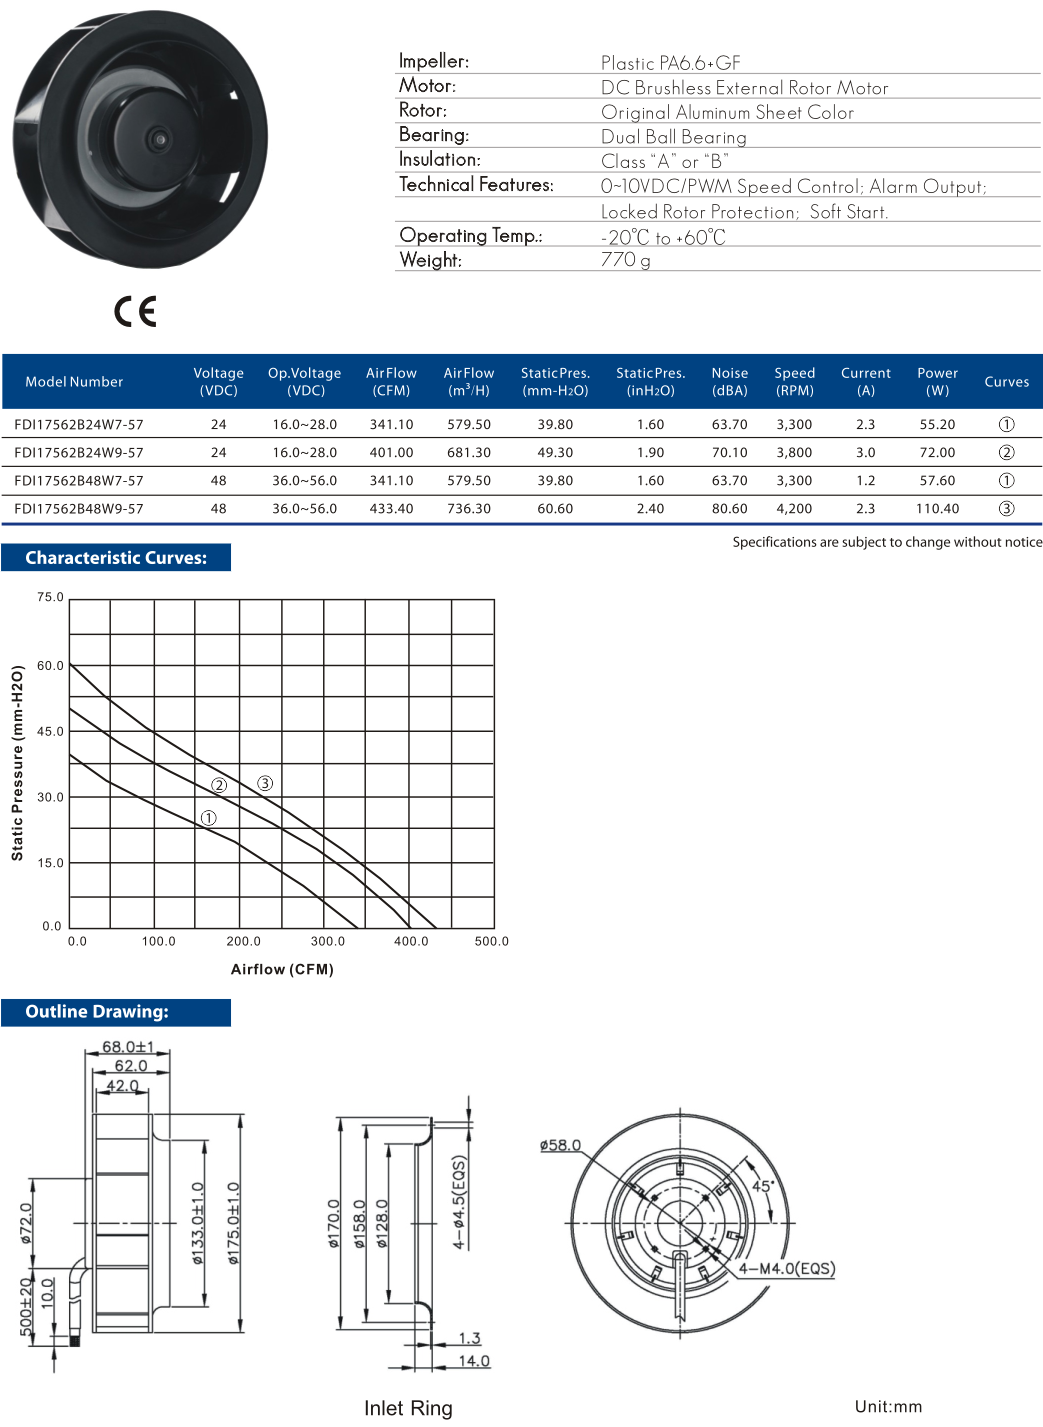 Cooltron DC Mortorized Impellers